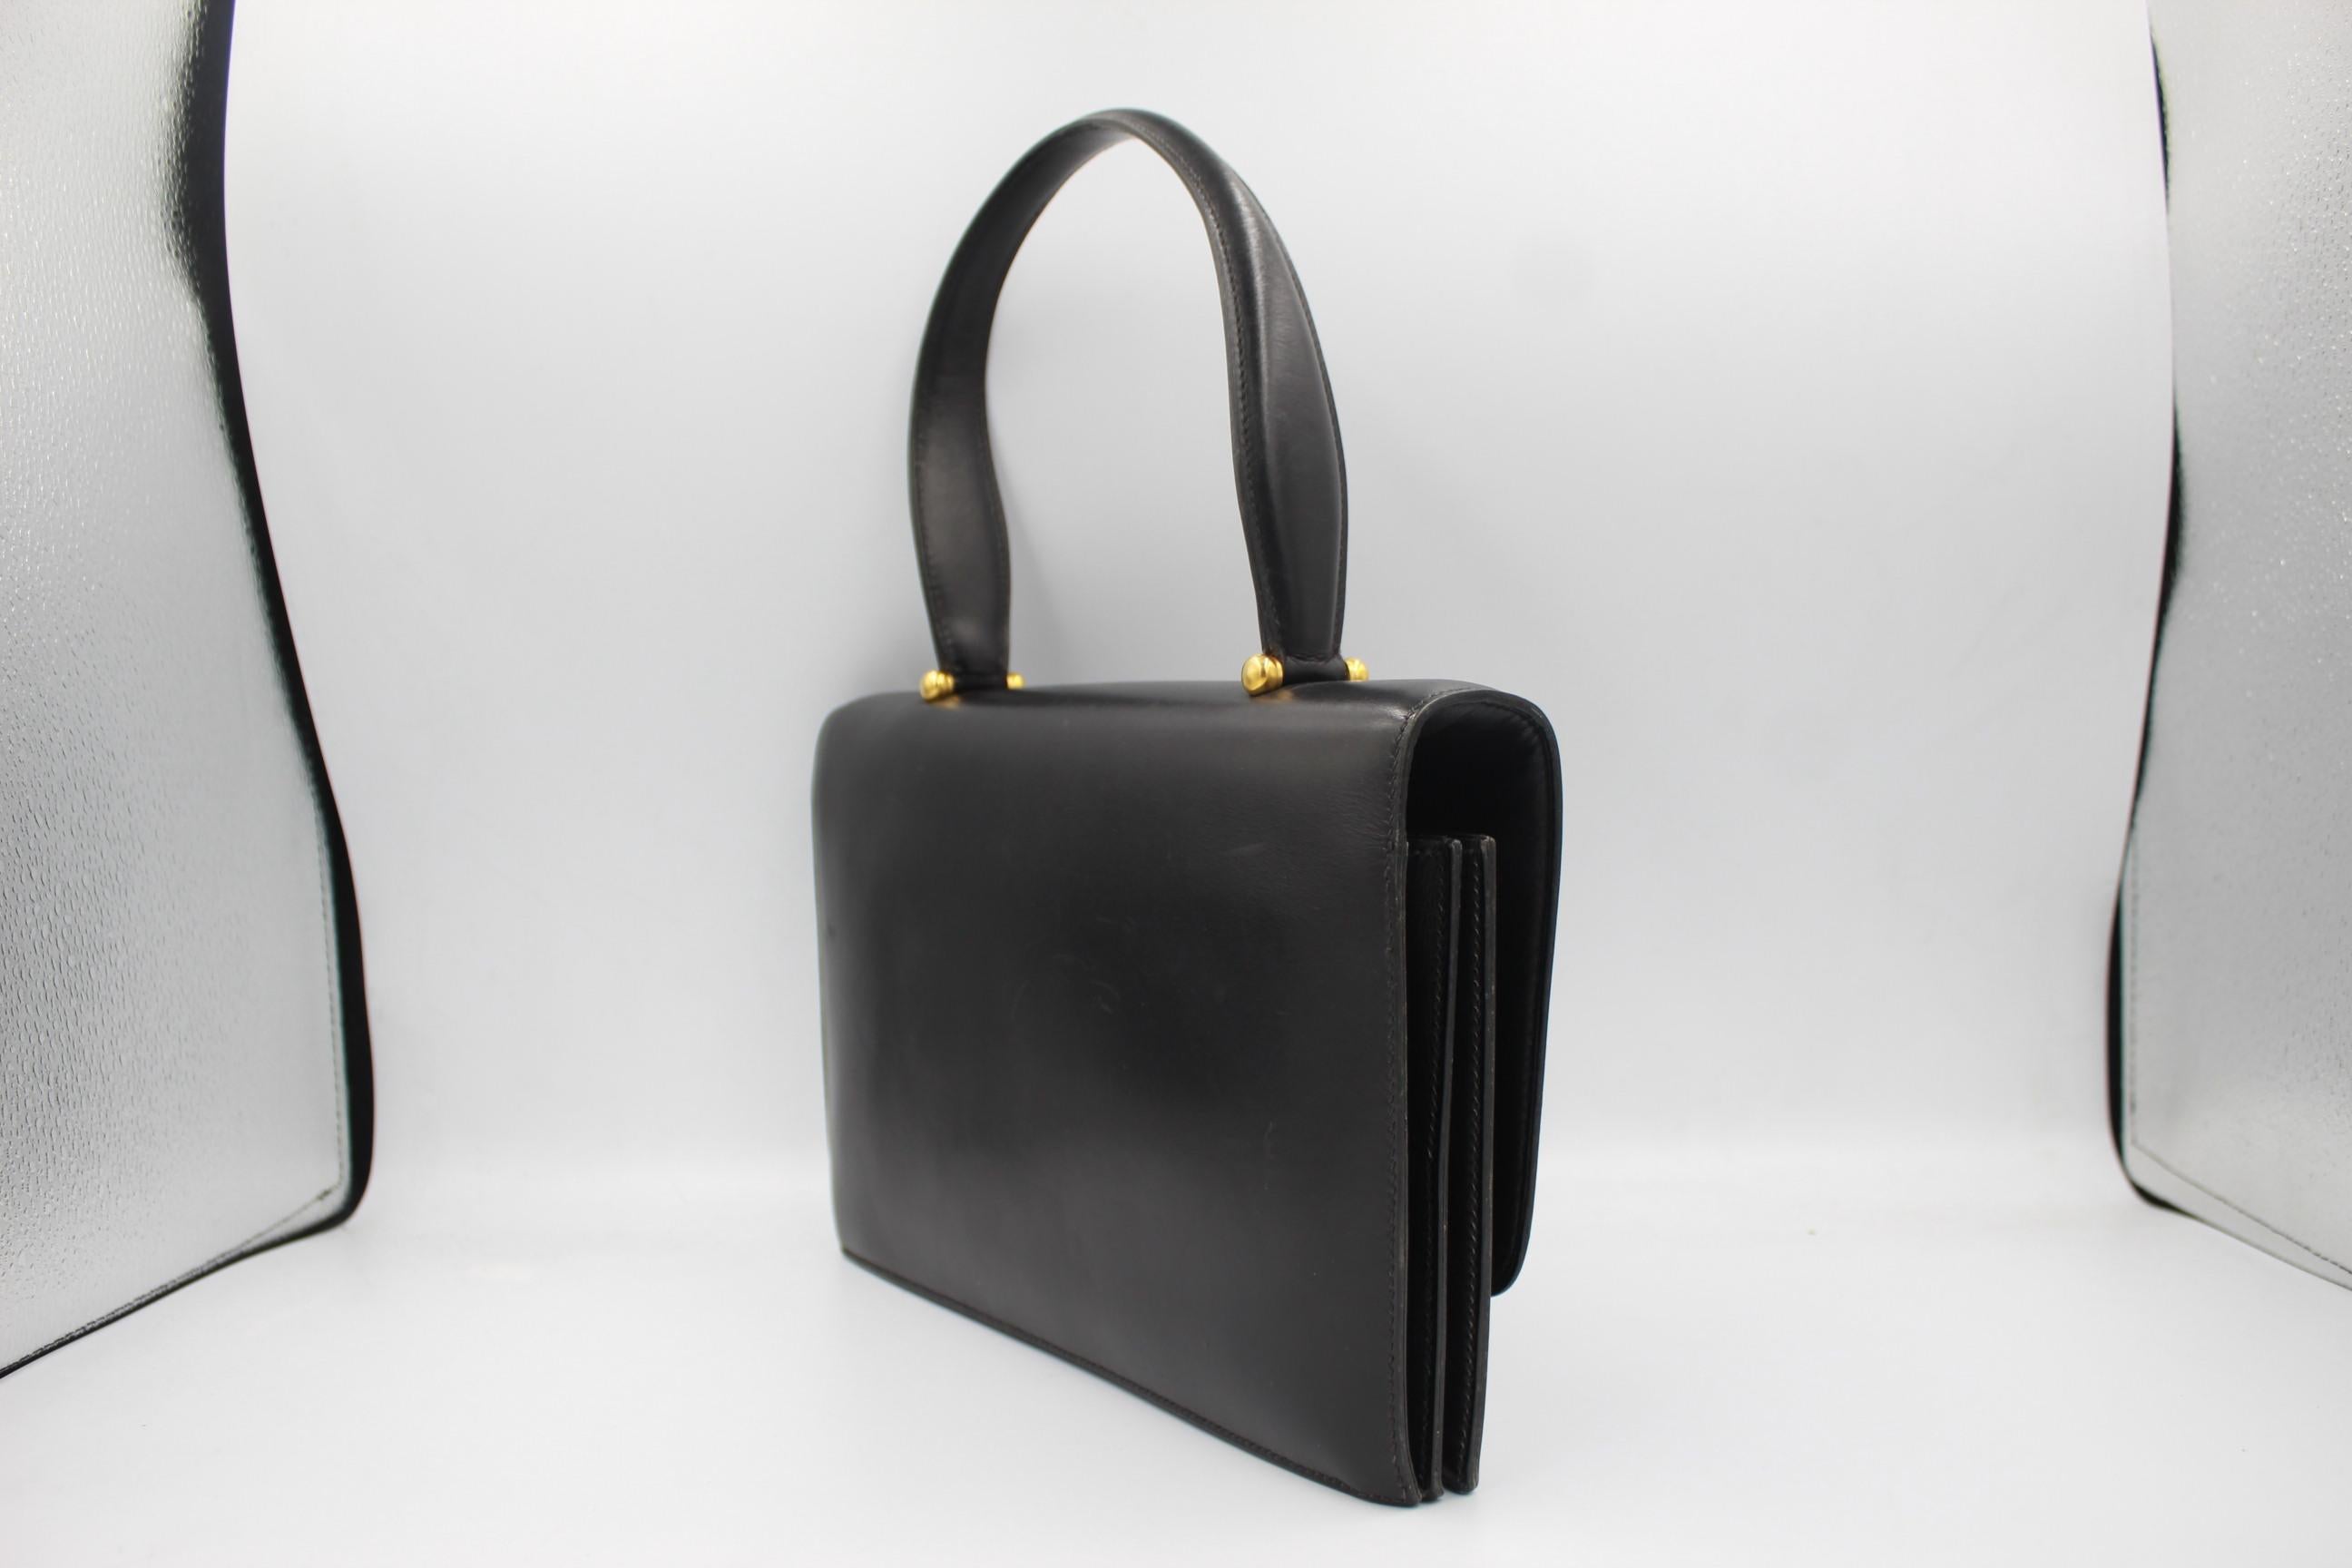 Vintage Hermes black leather bag in good vintage condition.
Size 26x16 cm 
Signed Inside, Clasp also signed, some signs of wear 
